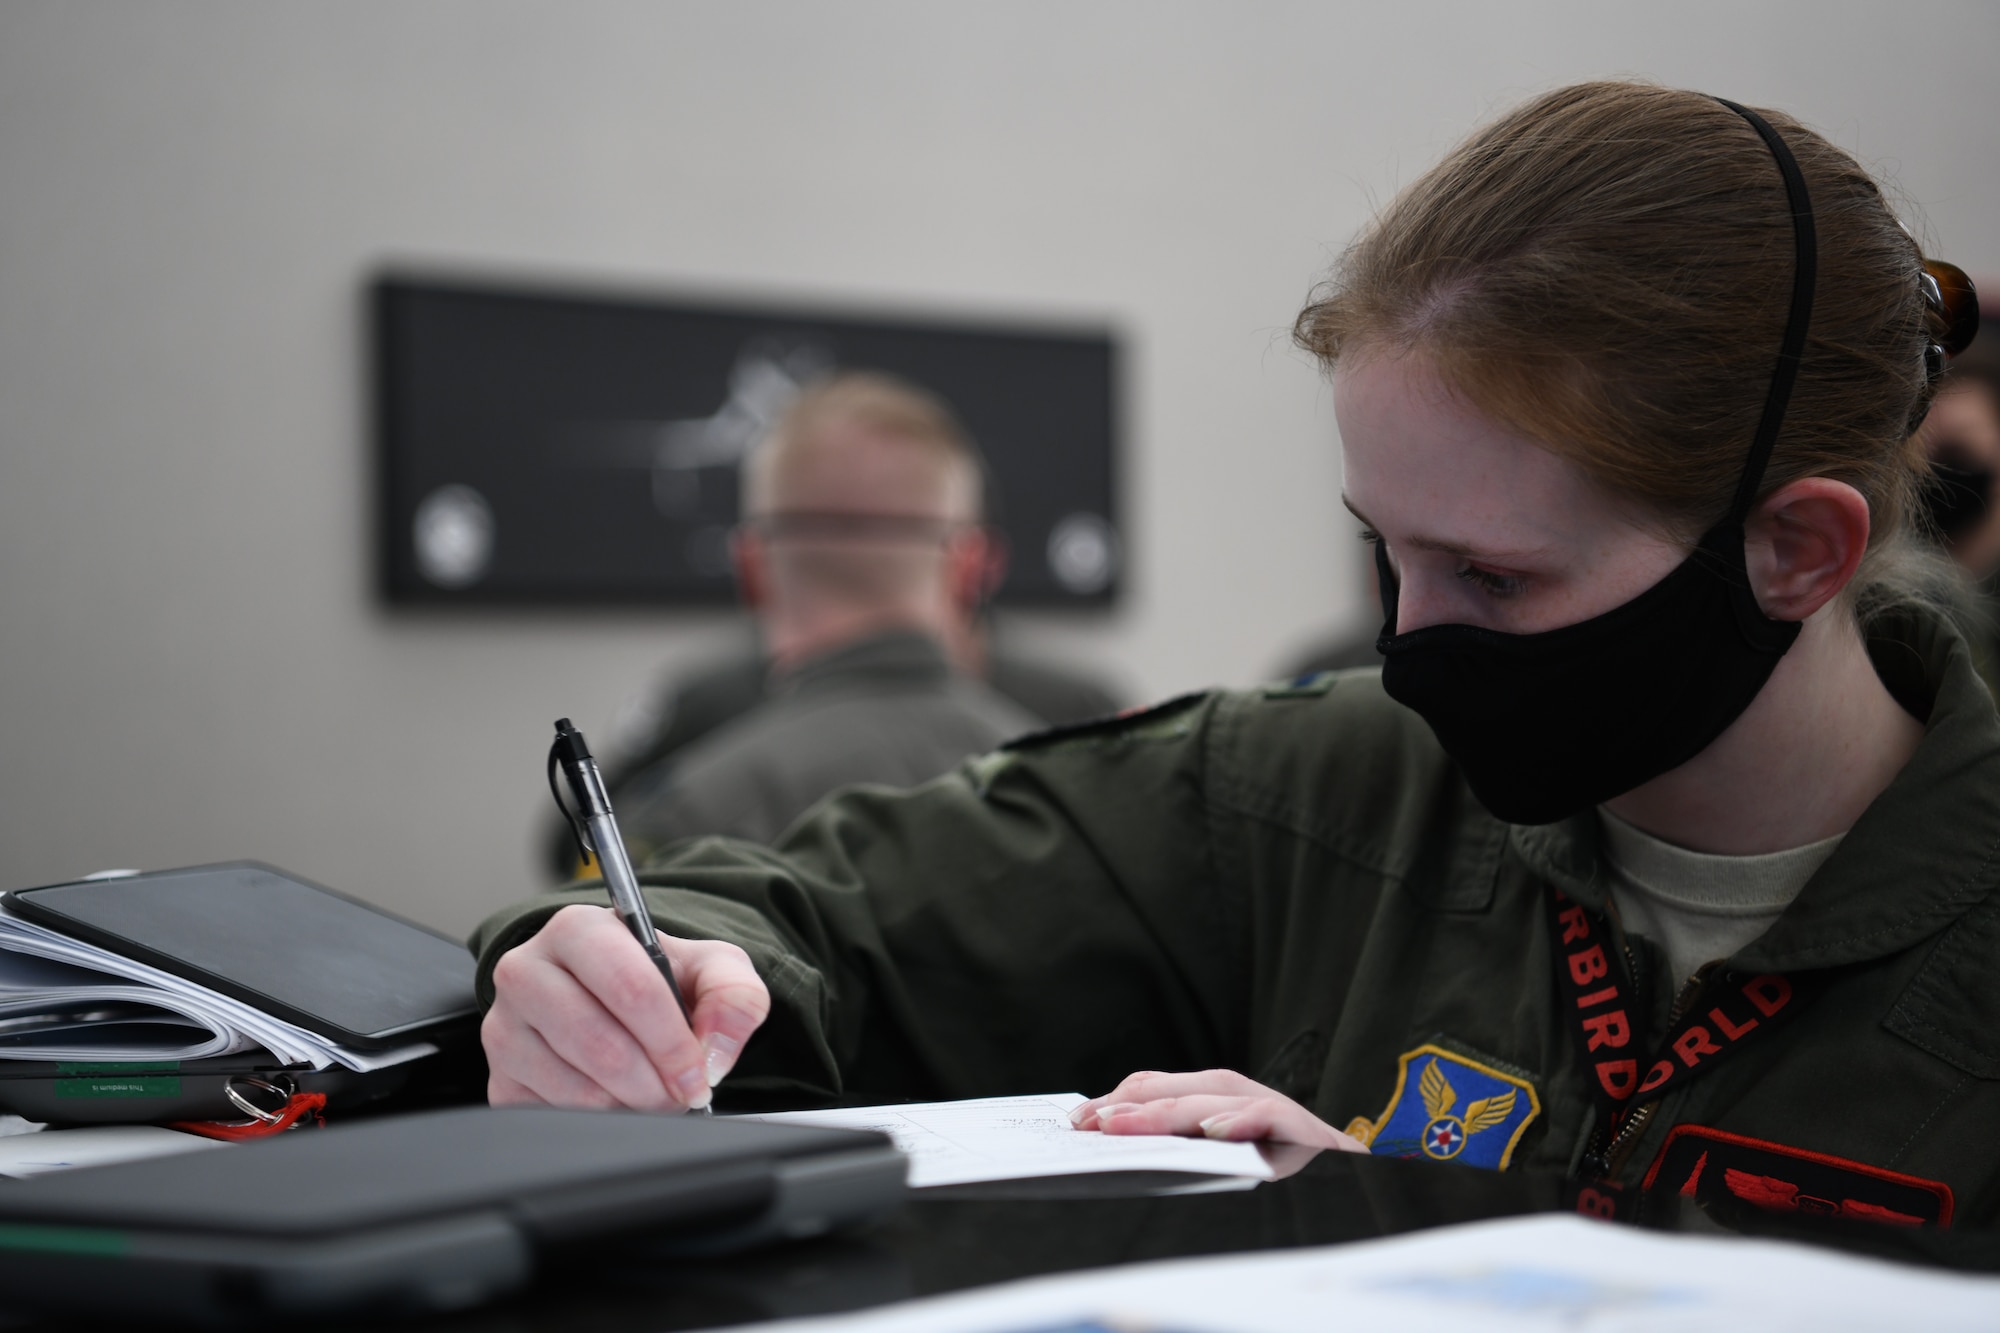 A 34th Bomb Squadron aviator writes mission information for a non-stop deployment from Ellsworth Air Force Base, S.D., May 4, 2020. Bomber deployments and operations enhance the readiness and training necessary to respond to any contingency or challenge across the globe. (U.S. Air Force photo by Airman Quentin Marx)